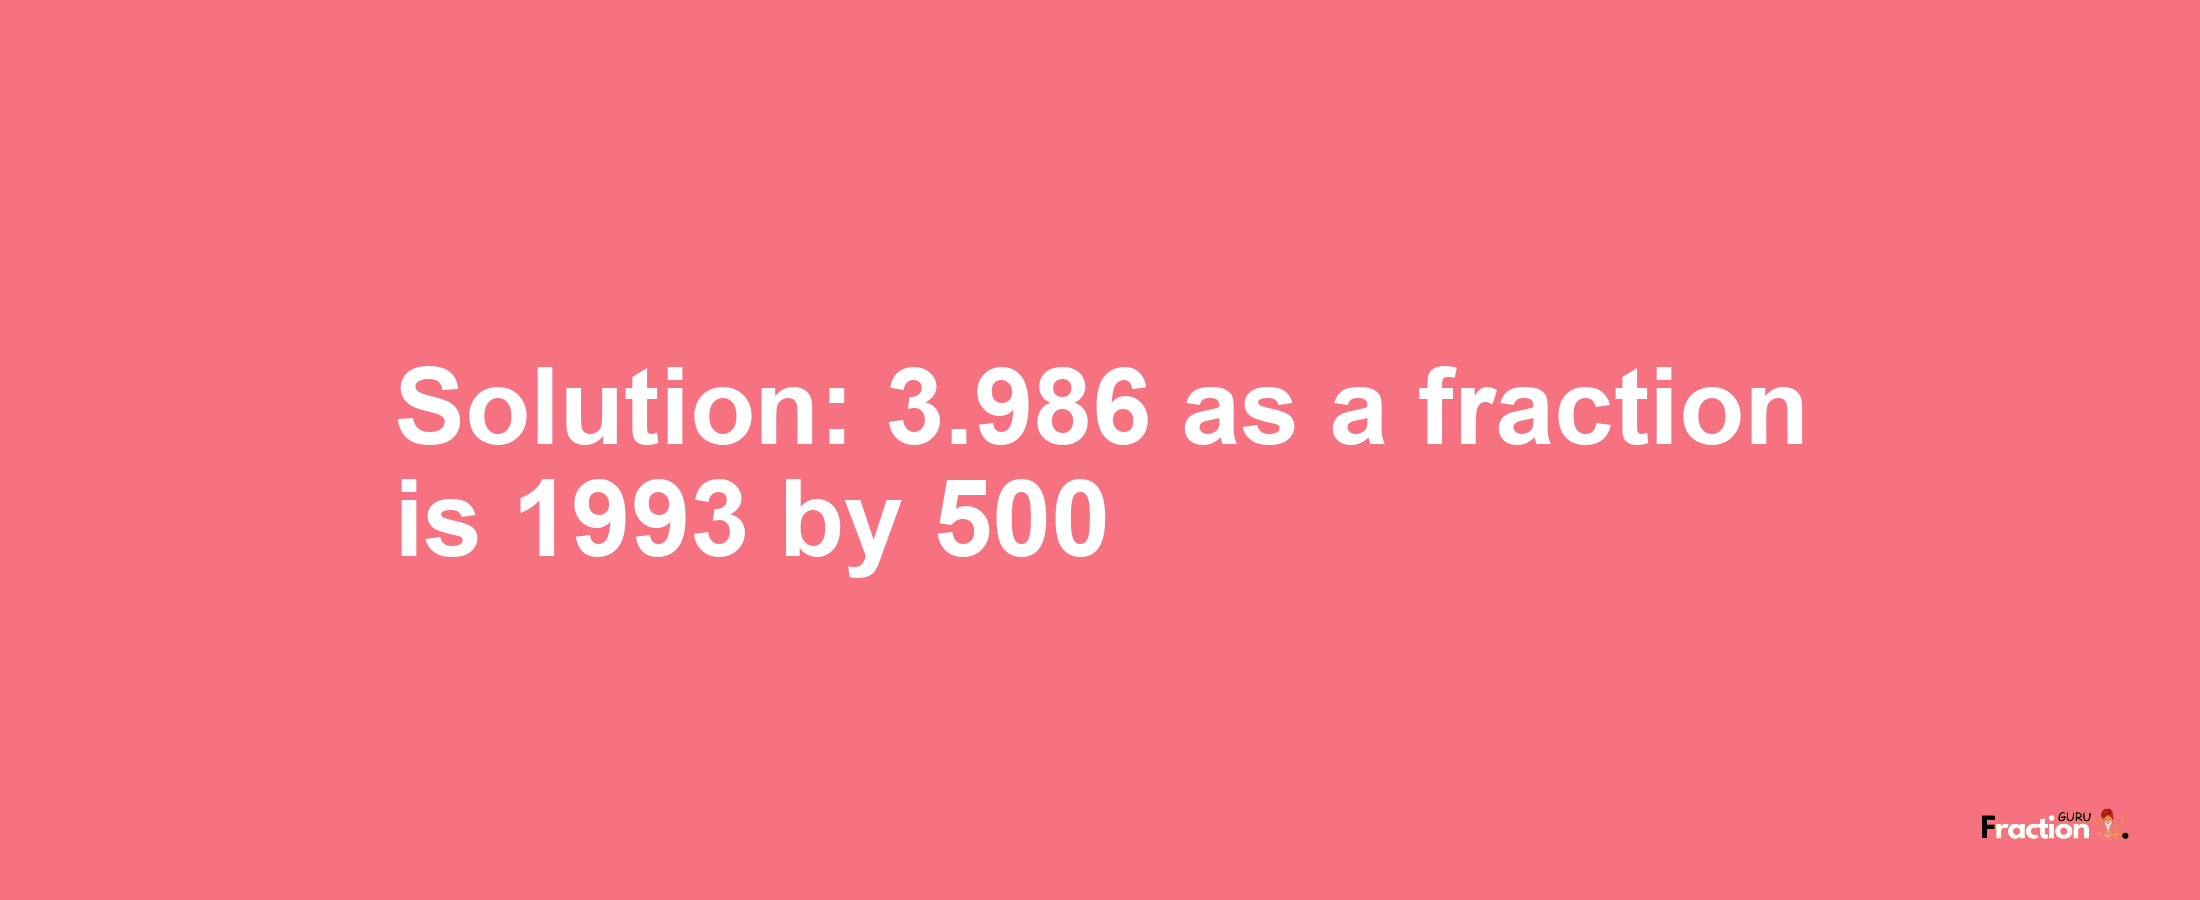 Solution:3.986 as a fraction is 1993/500